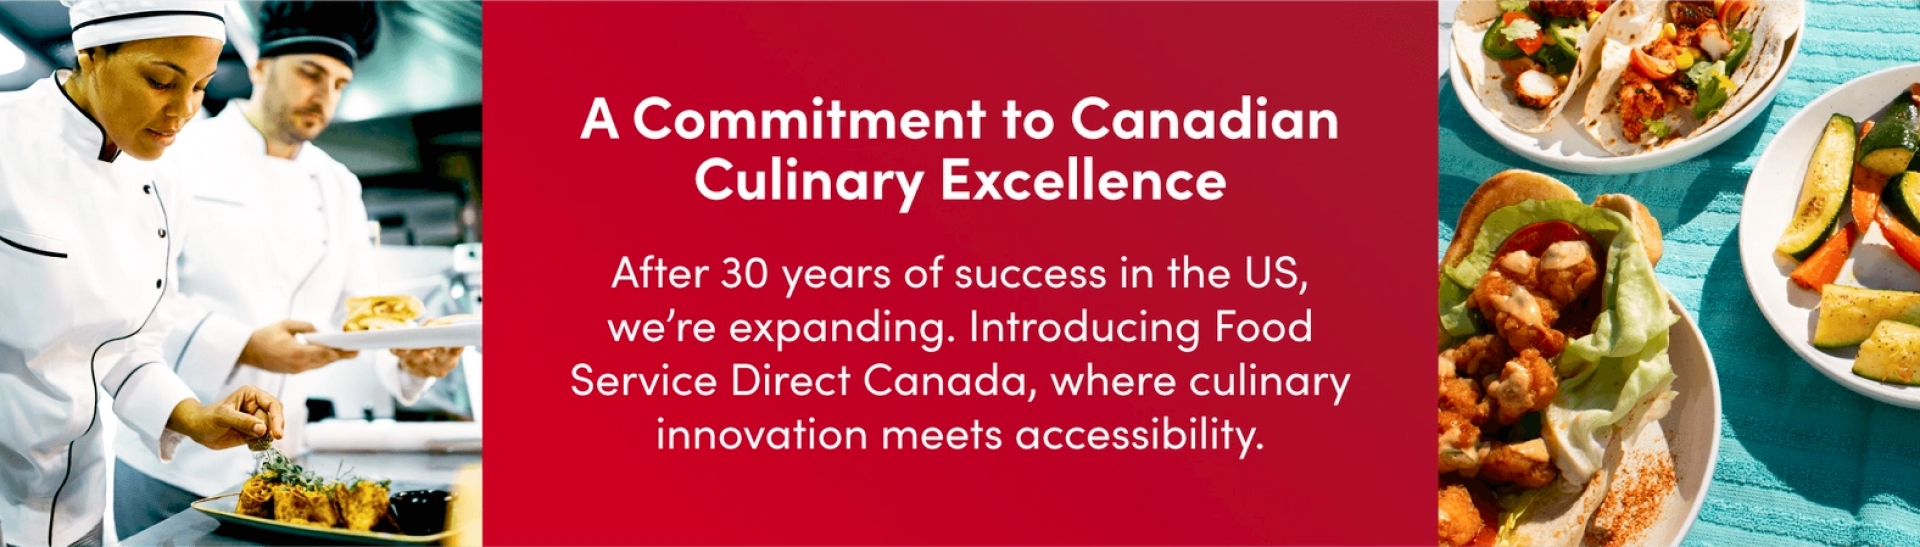 Dedicated to Canadian Culinary Excellence